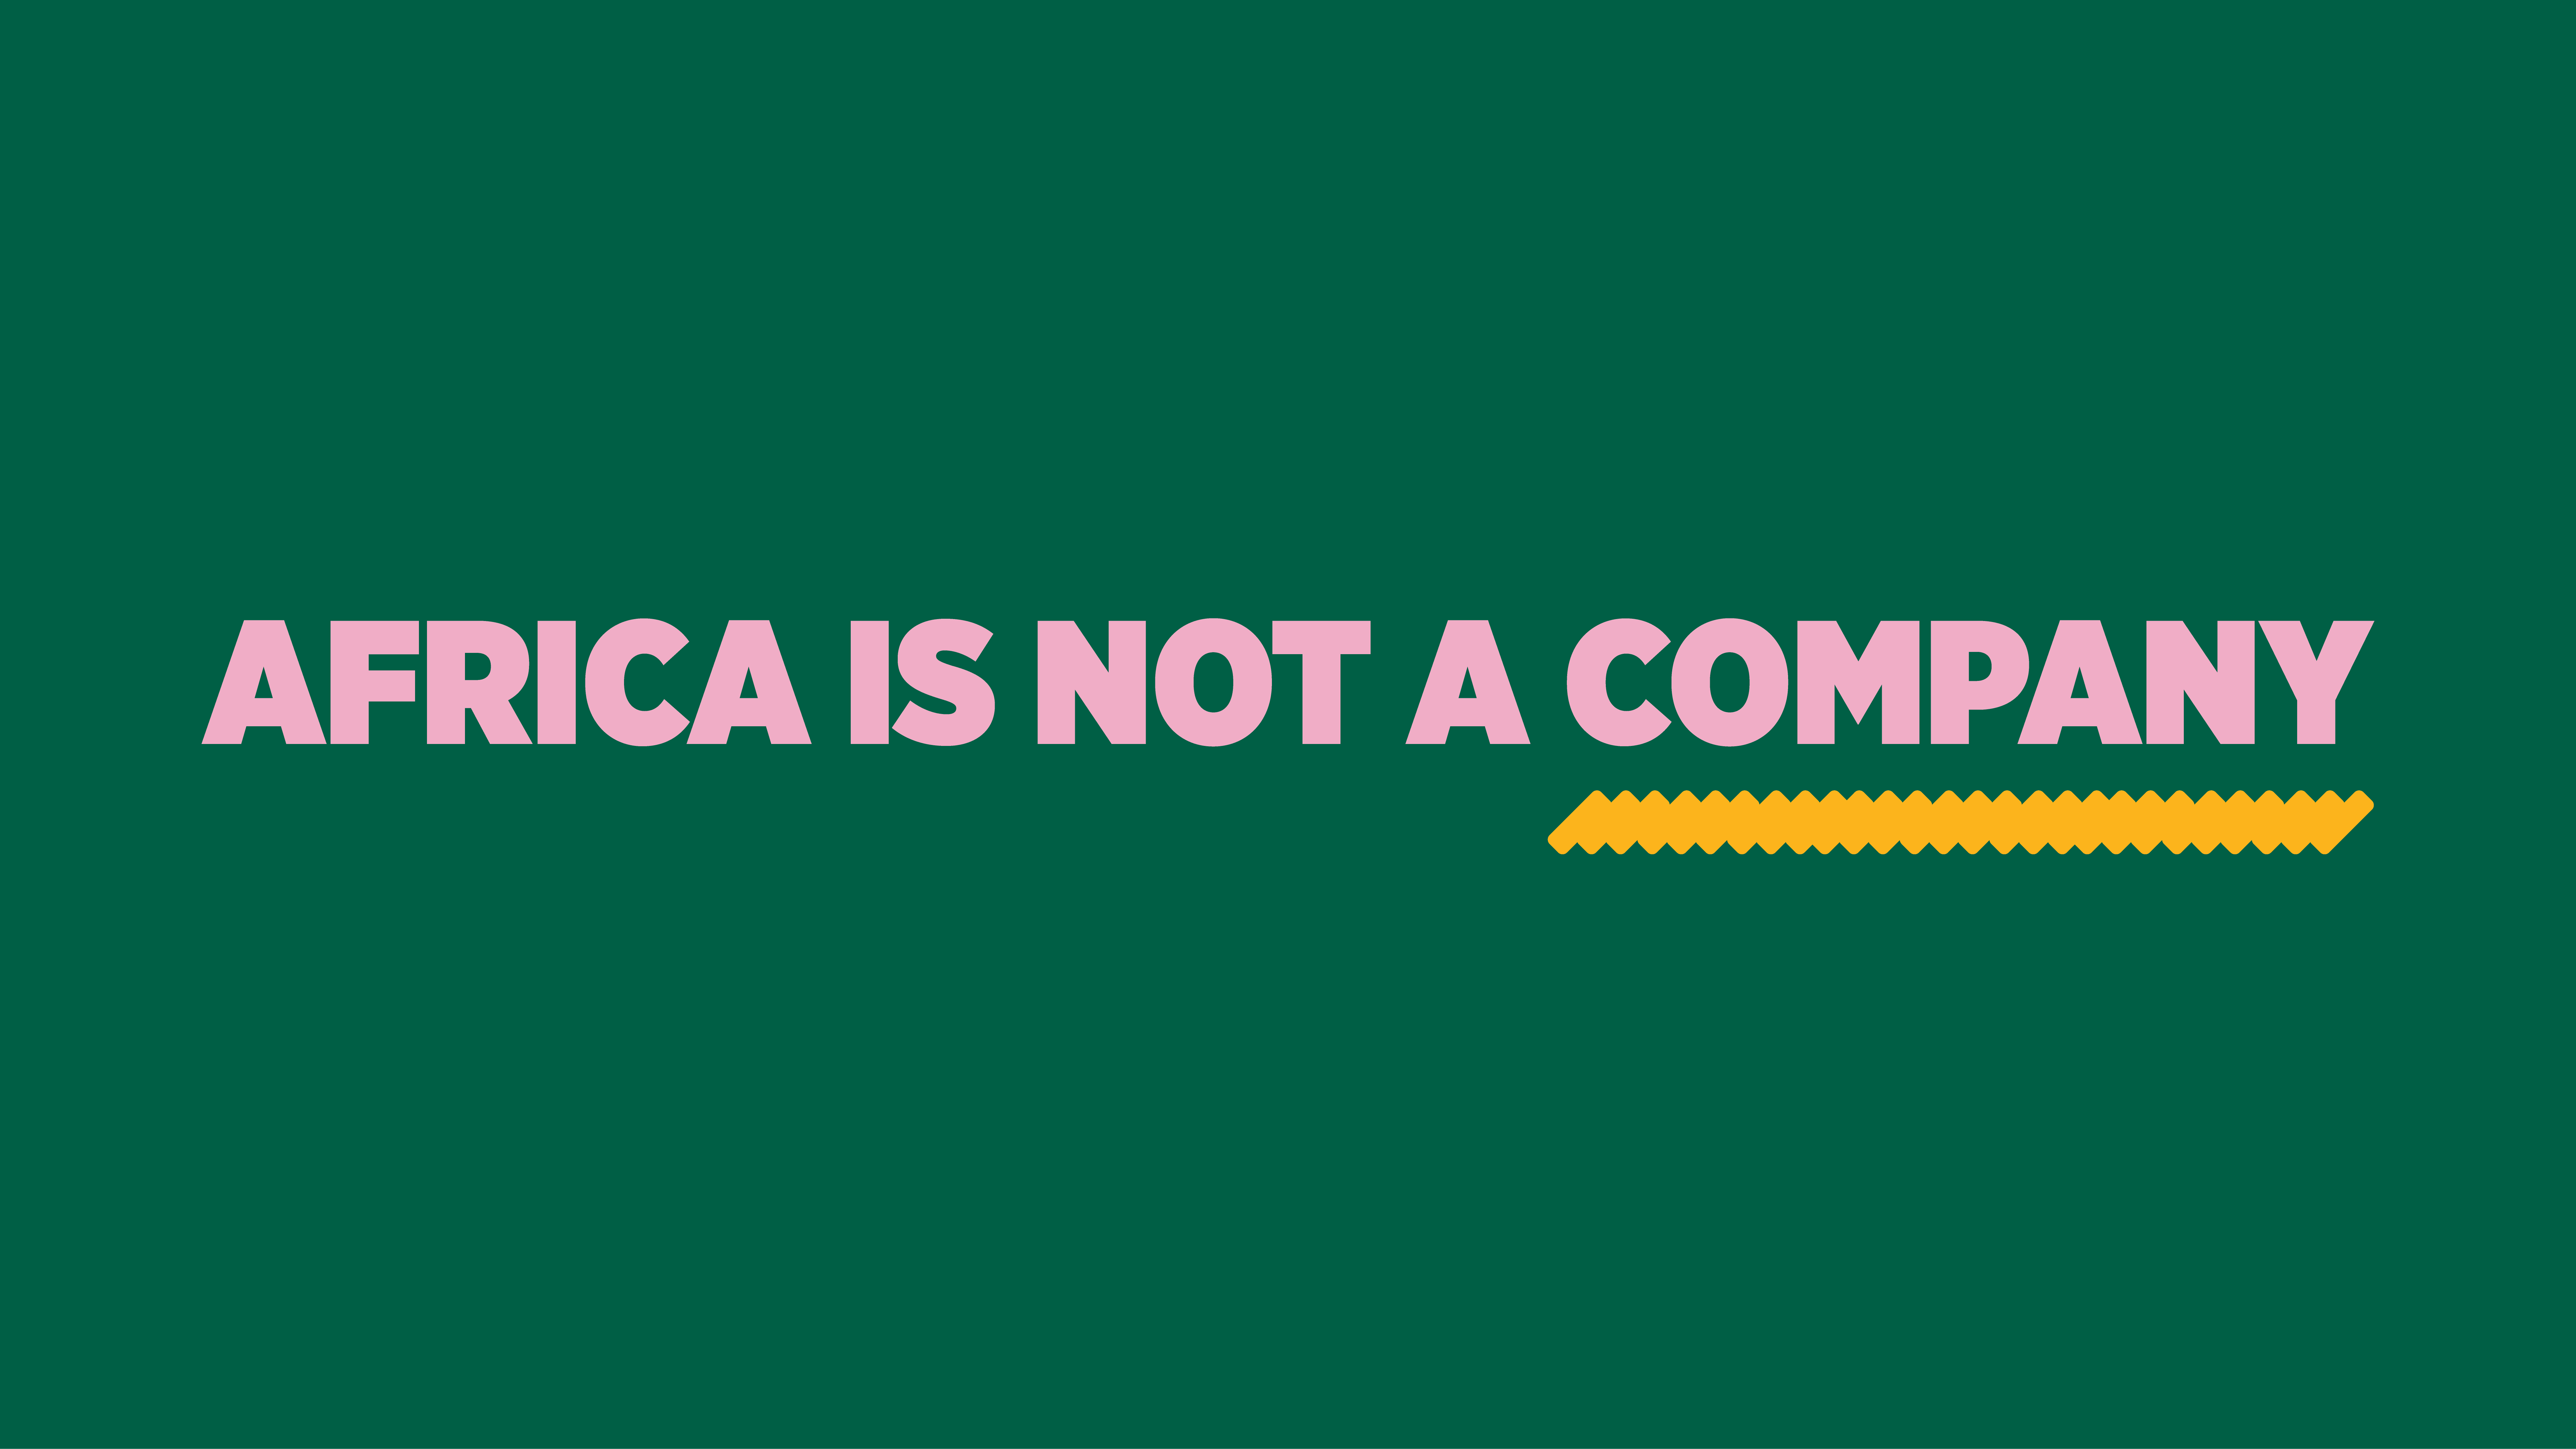 Africa is not a company